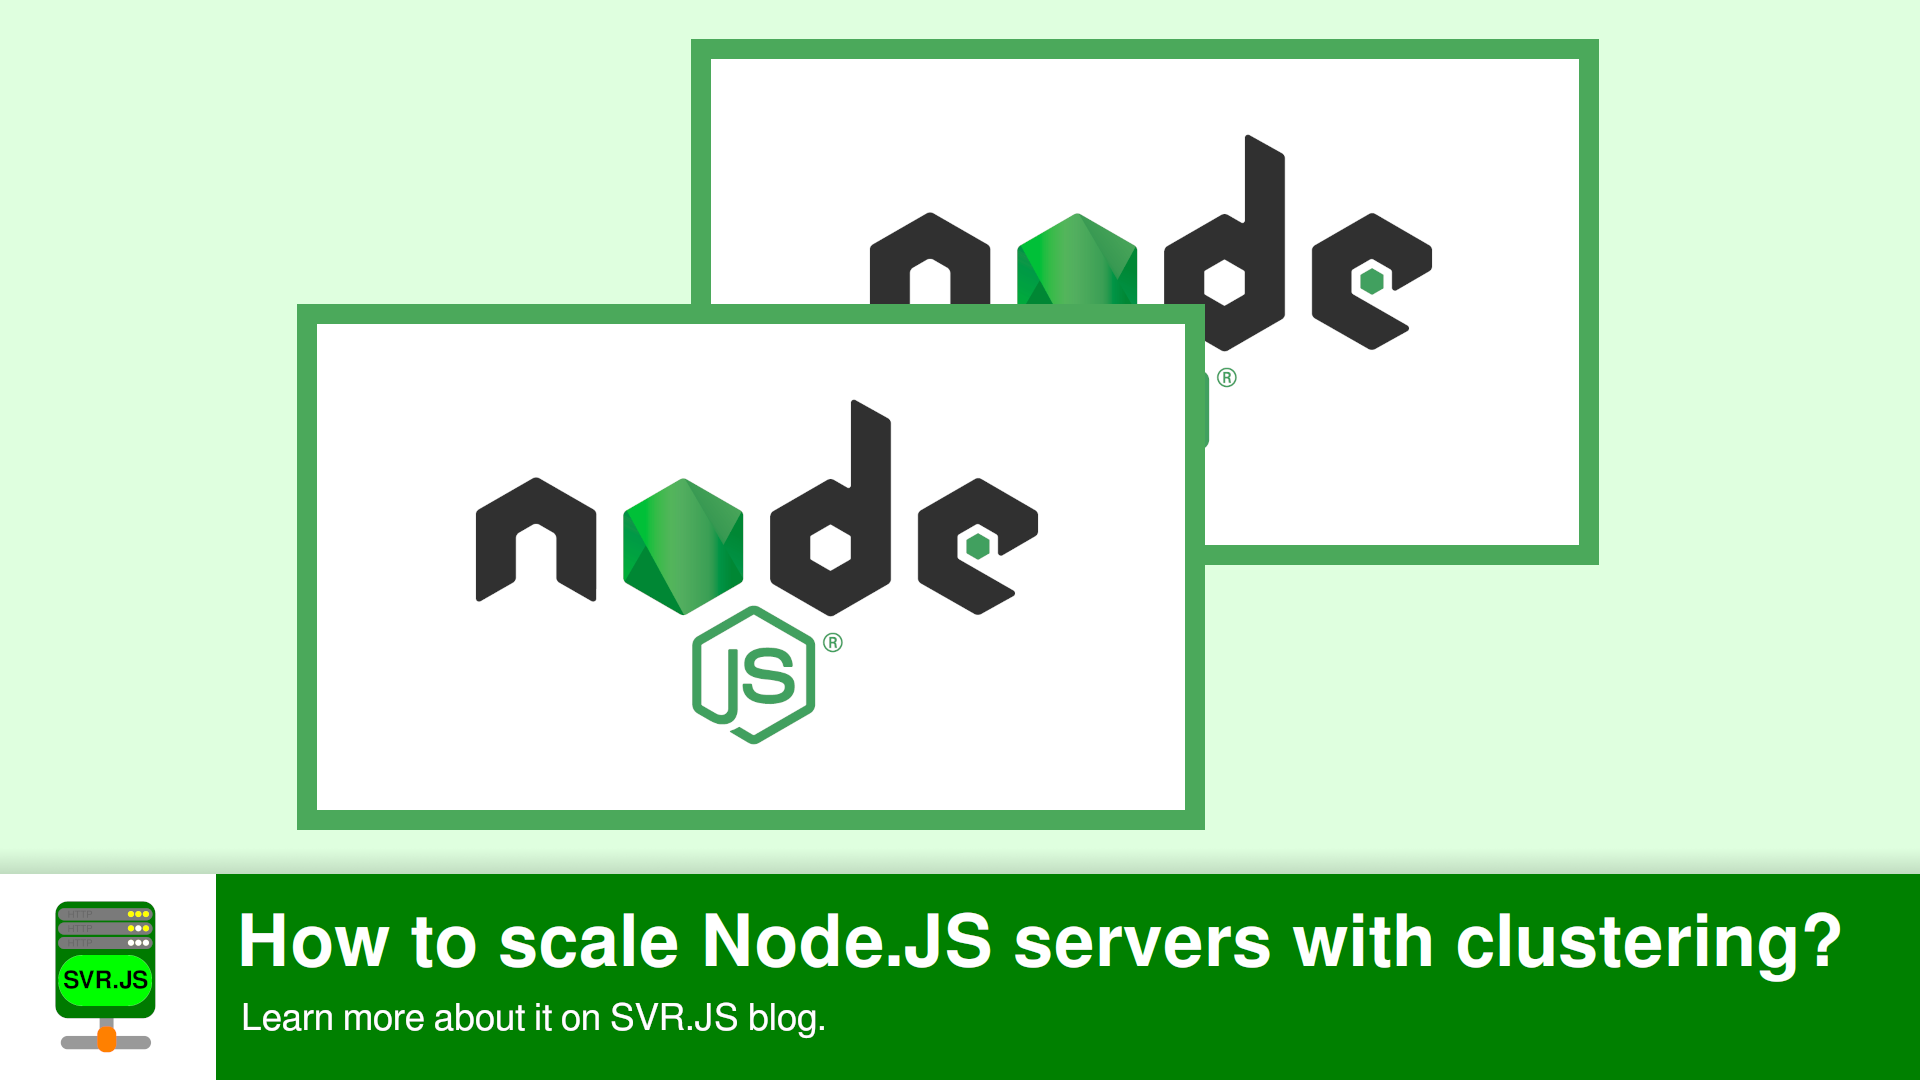 How to scale Node.JS servers with clustering?